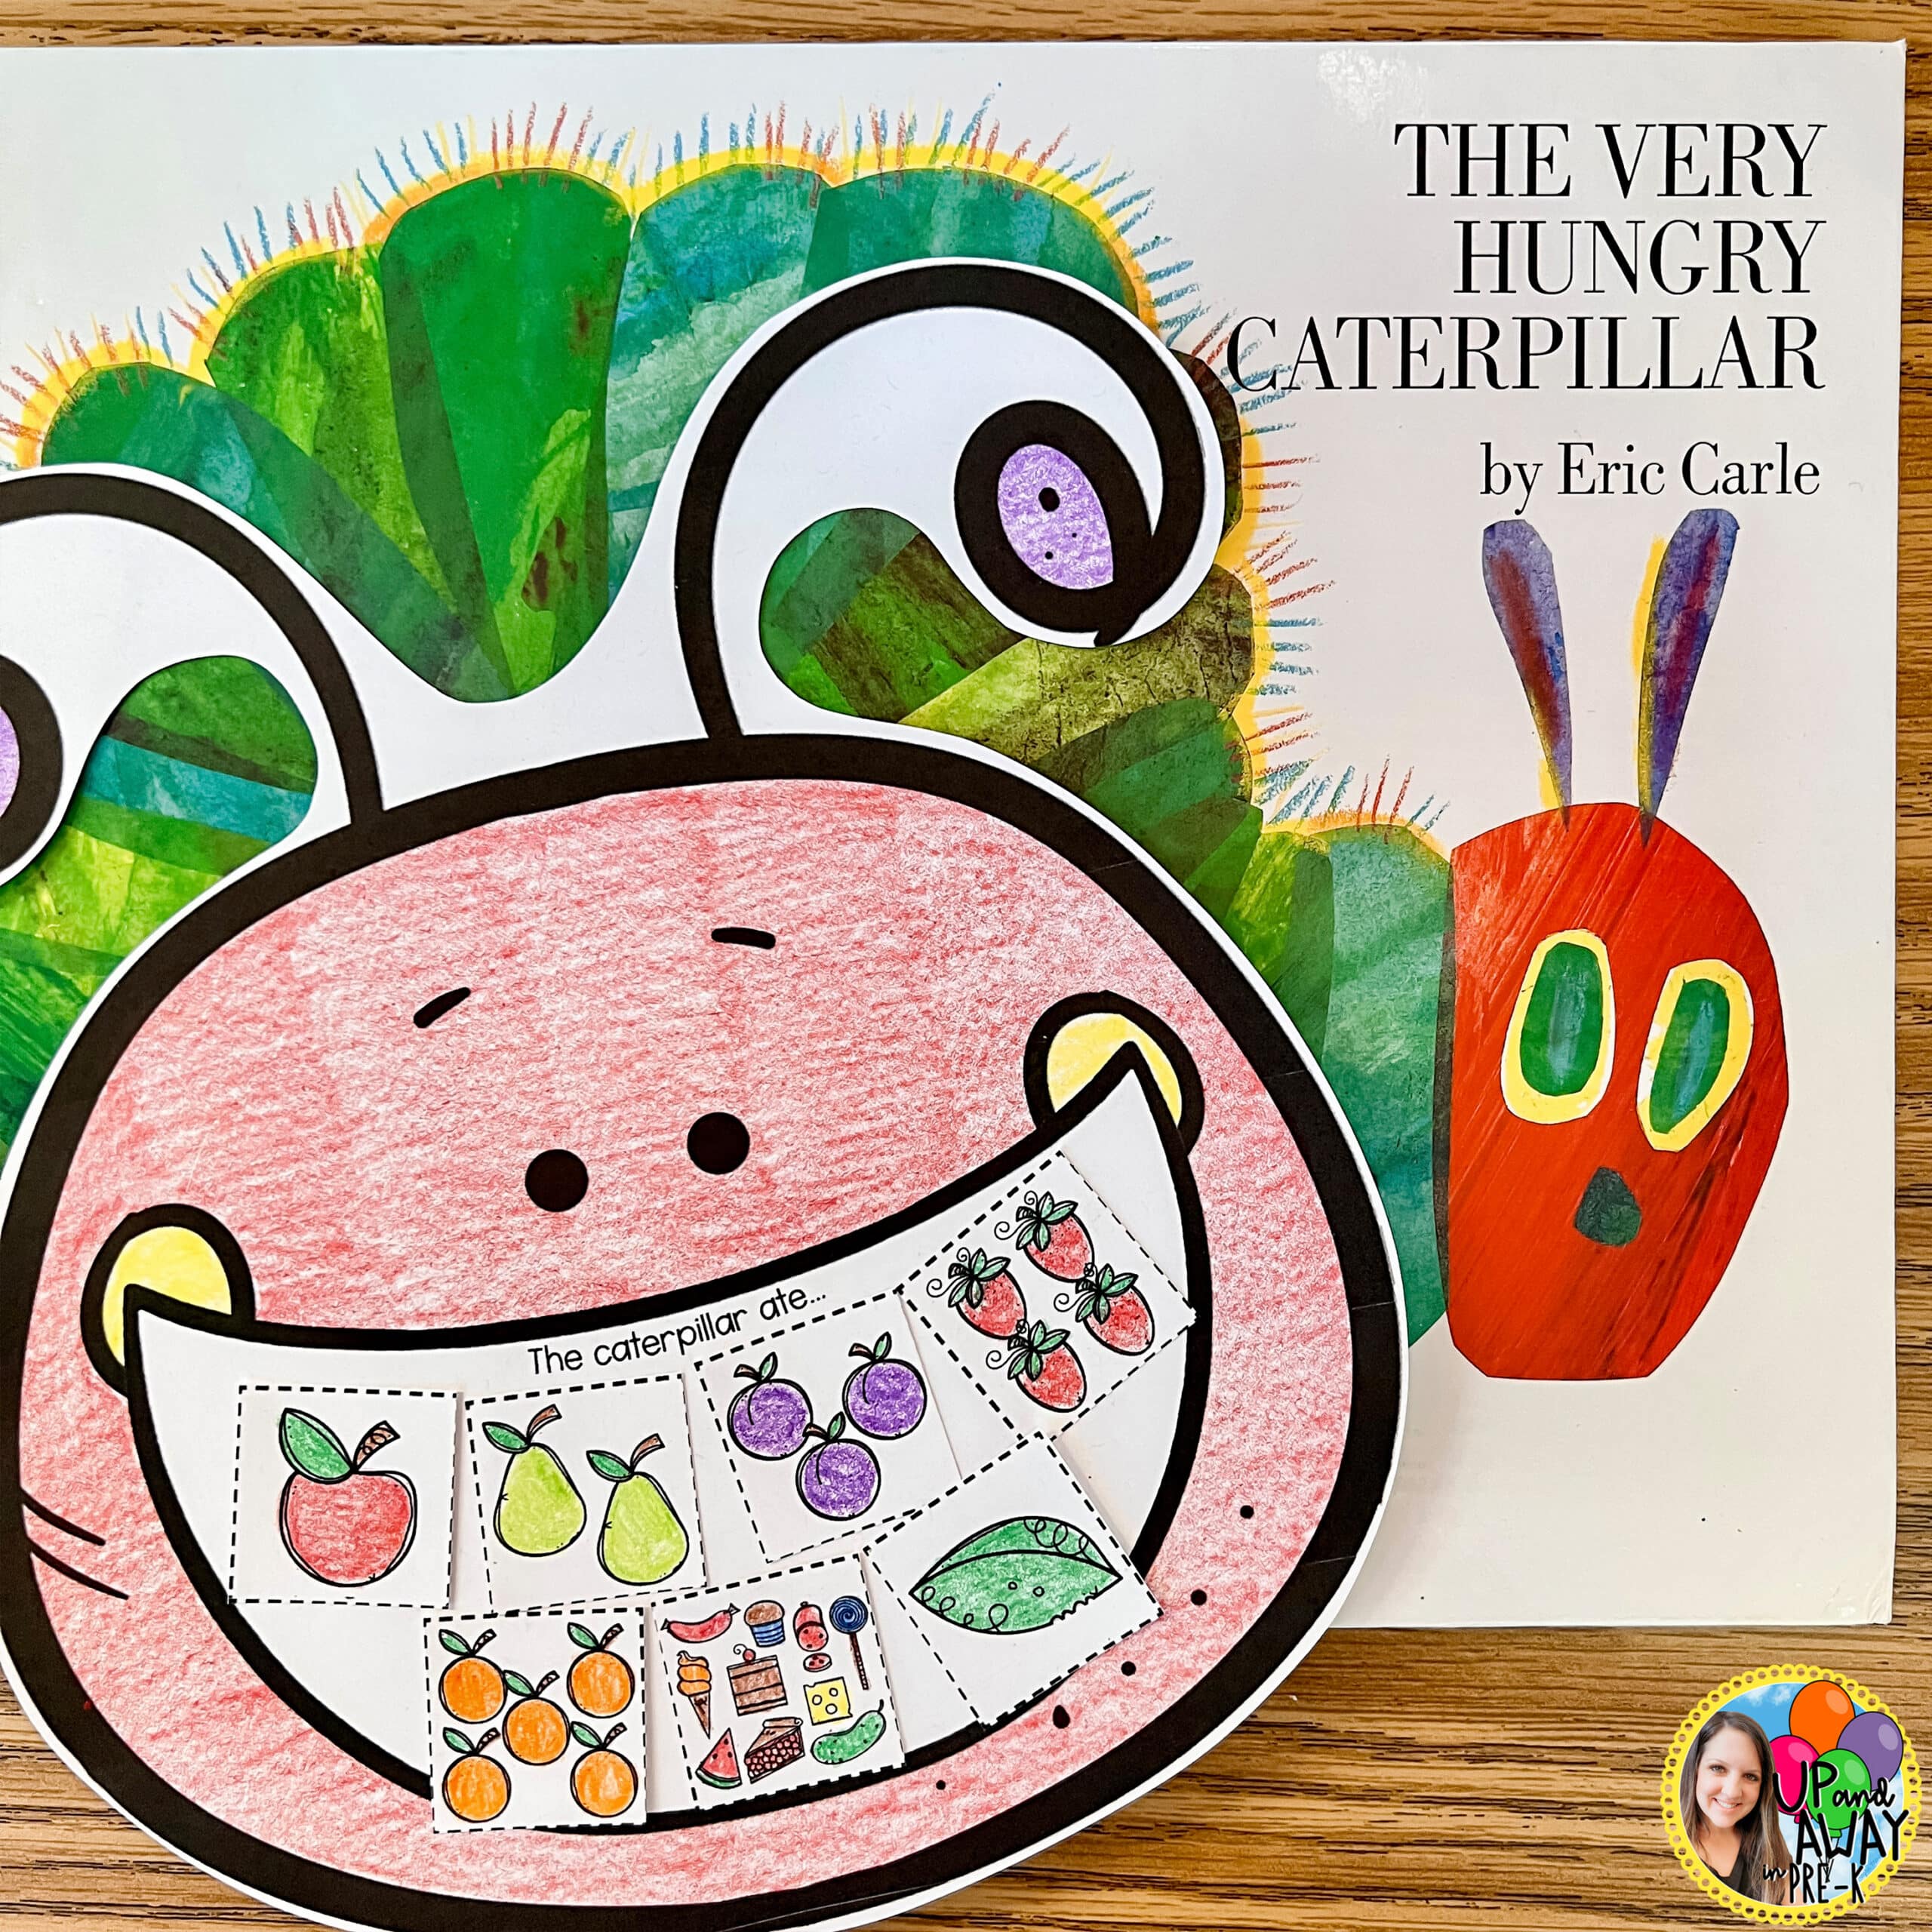 Complete Guide To Very Hungry Caterpillar Activities For Pre K Up And Away In Pre K